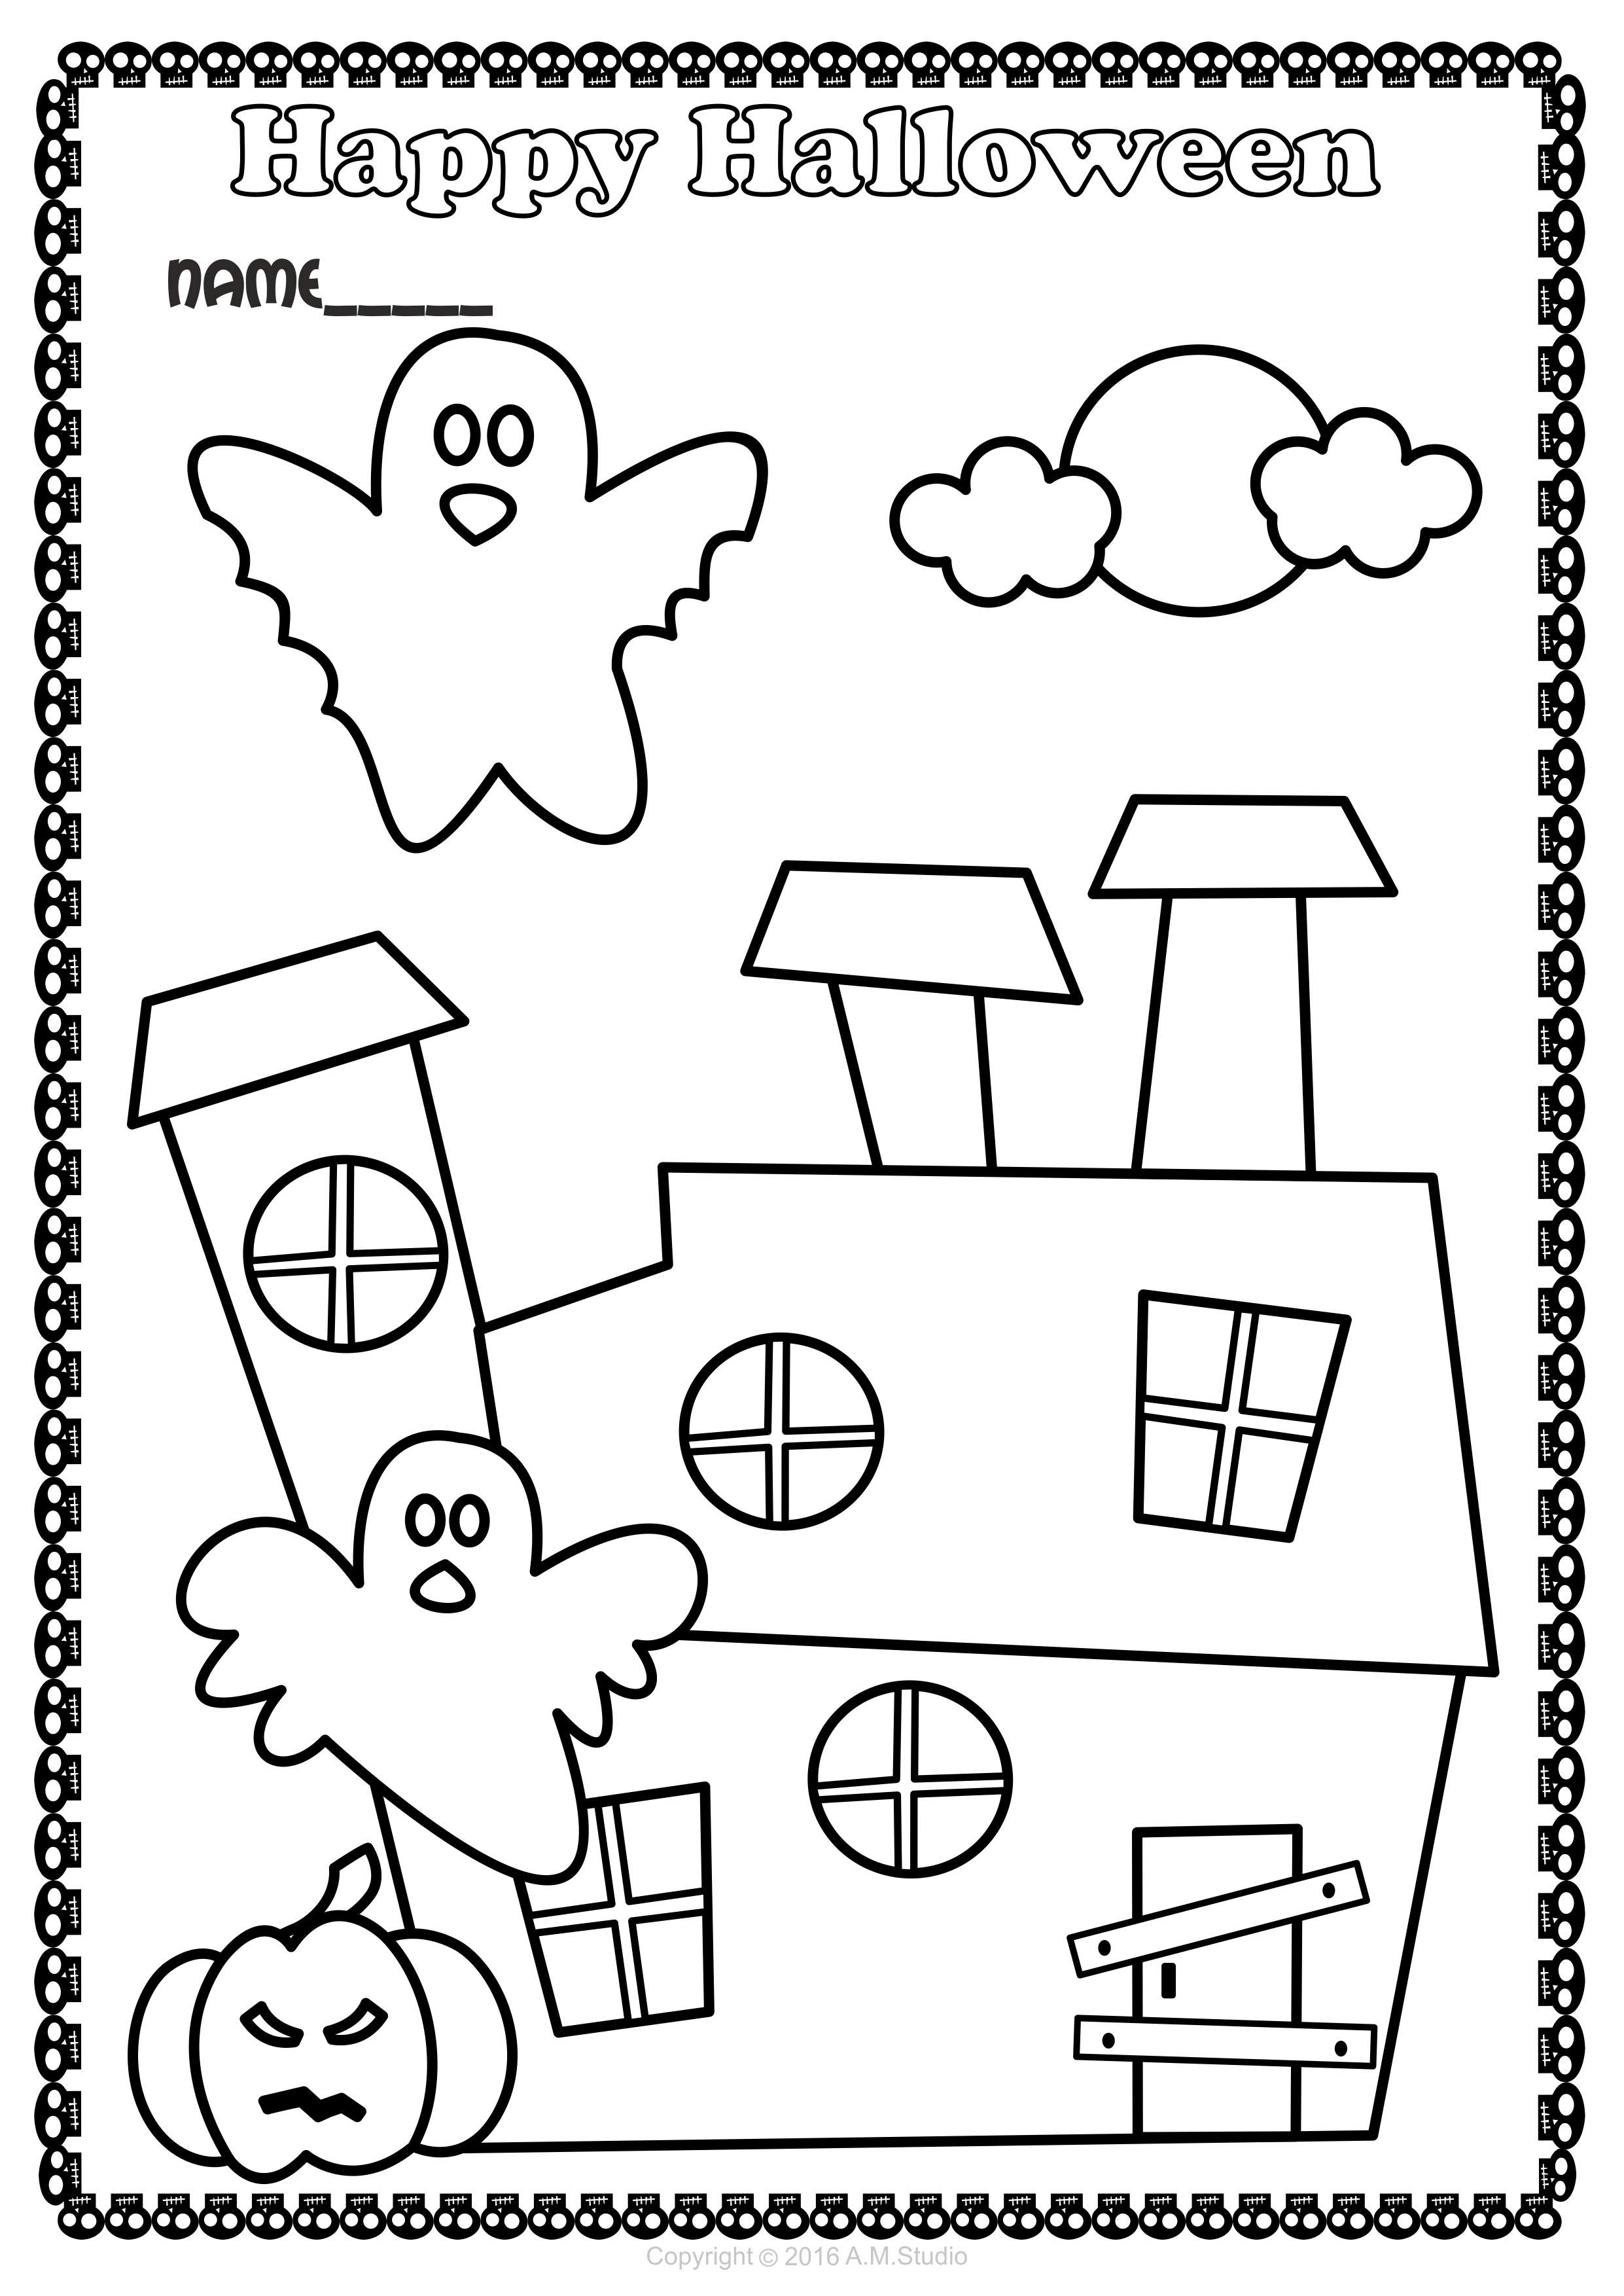 Halloween Coloring Pages for Kids Printable (img # 2)